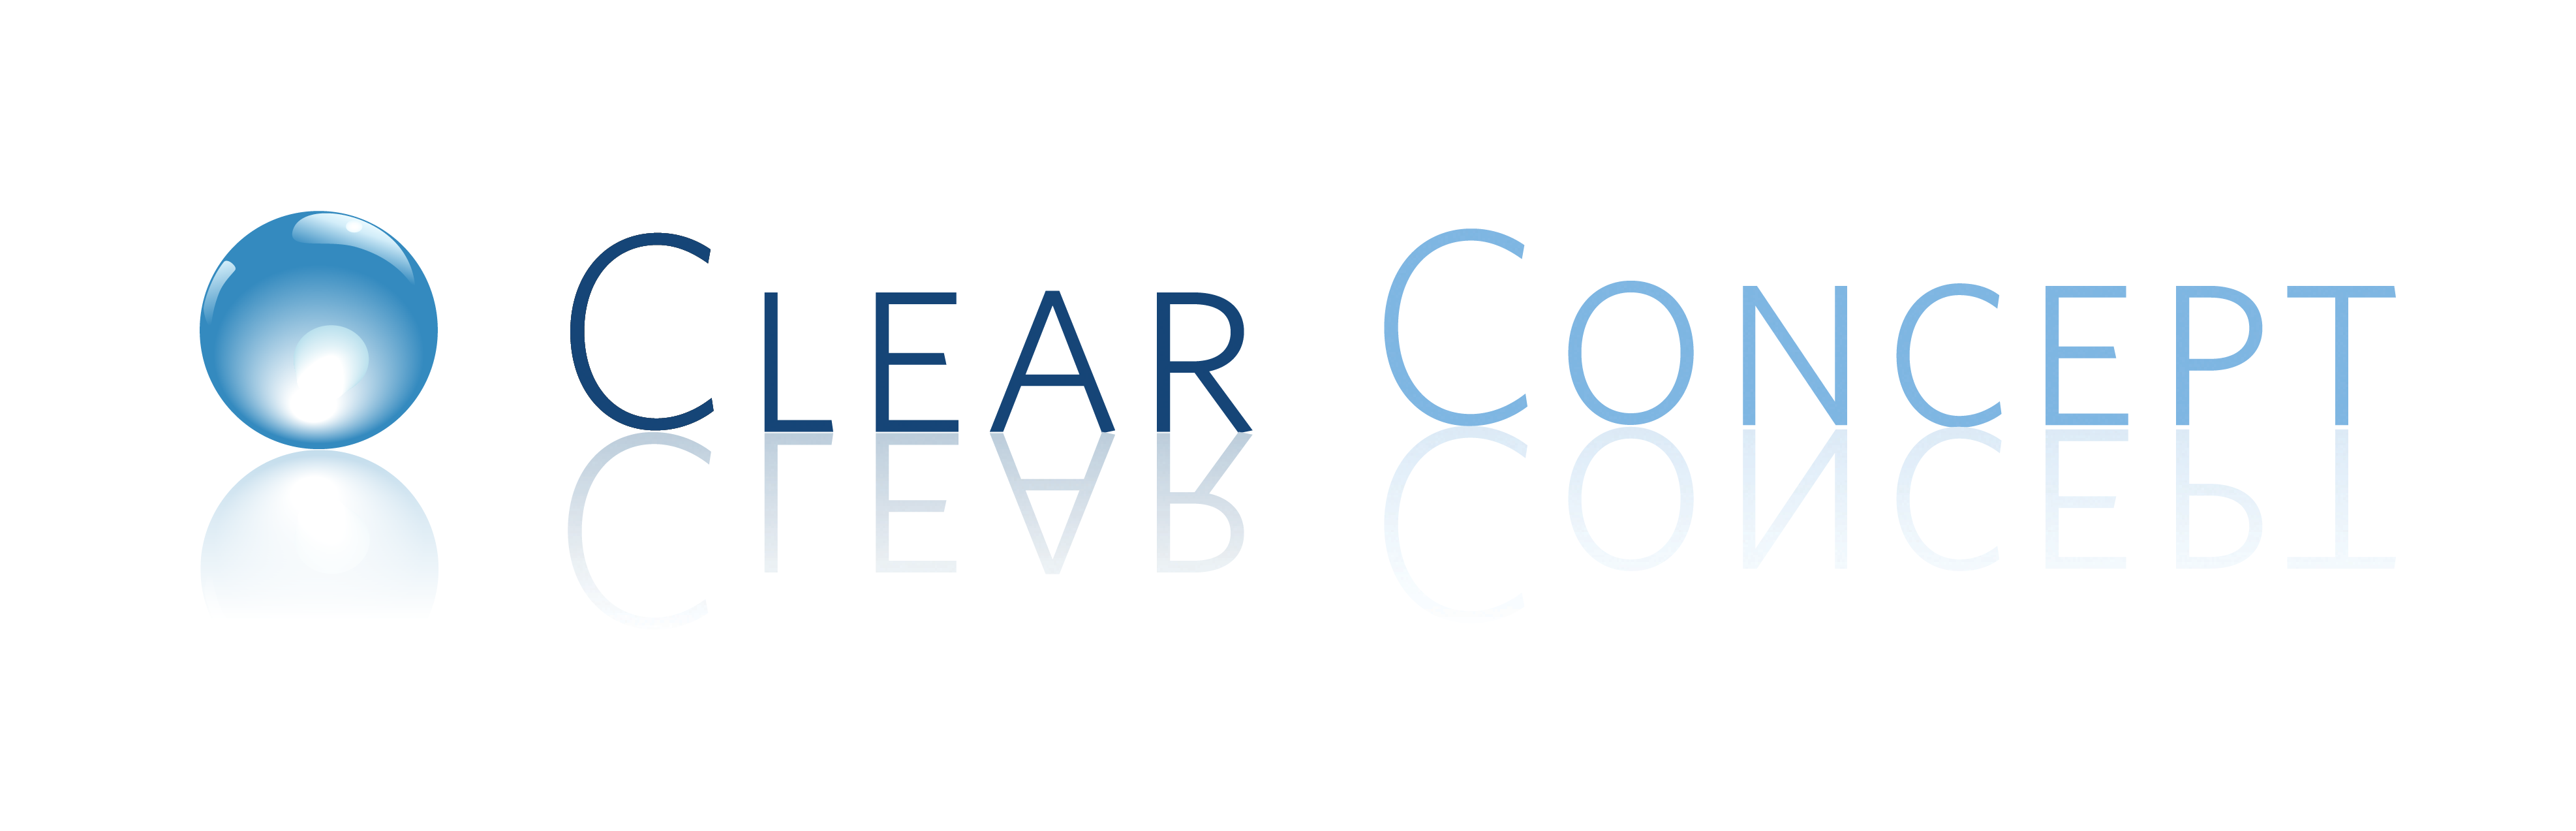 Clear_Concept_Logo_on_White_20191106ae4eh.png